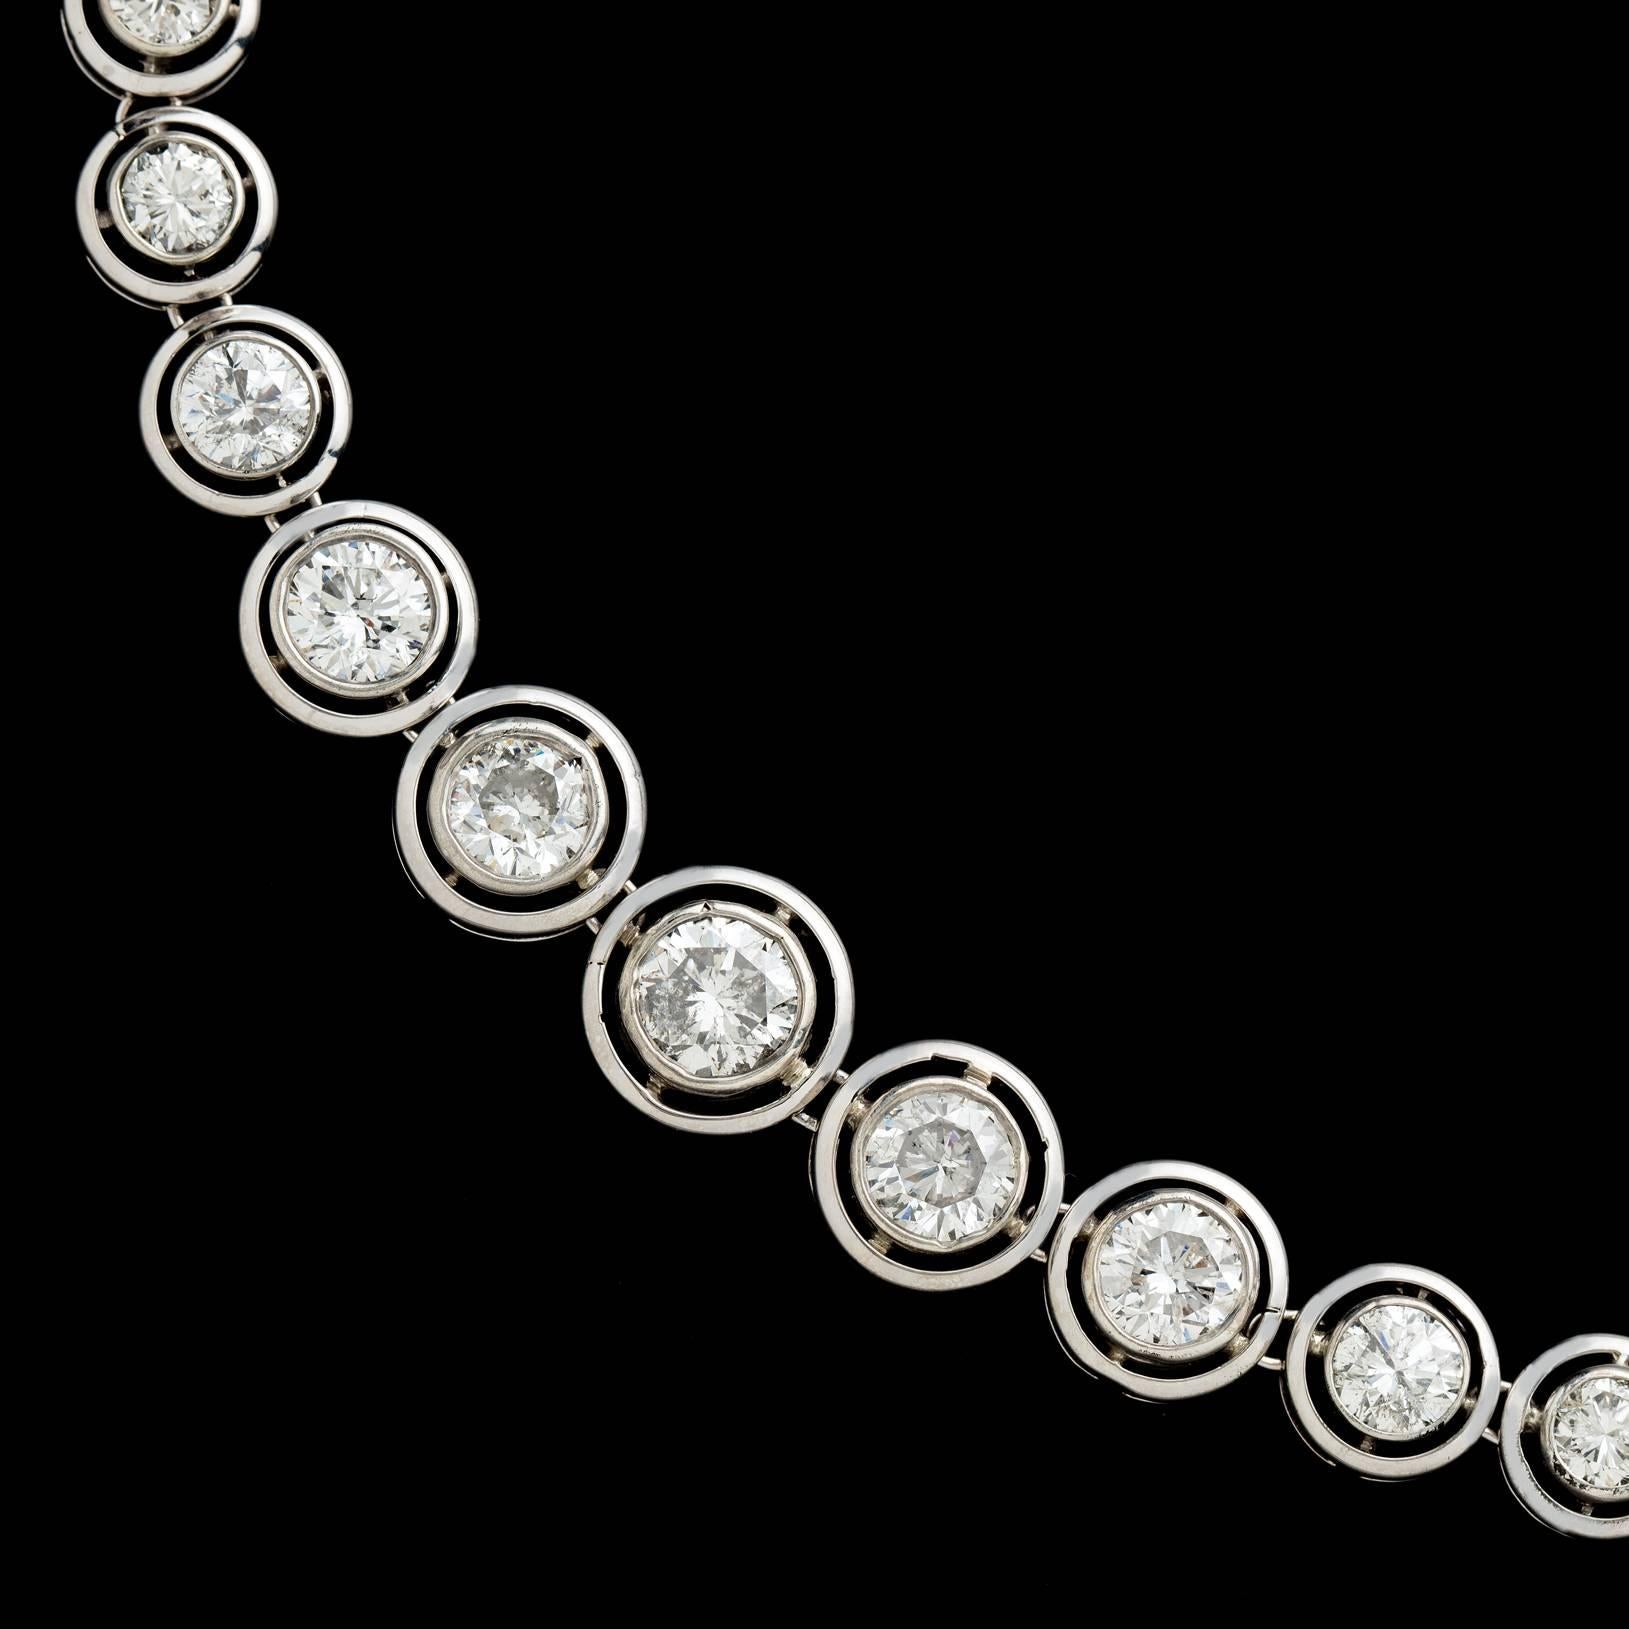 A lesson in historic beauty! This incredibly well preserved antique diamond necklace features 57 Old Mine Cut Diamonds for approximately 8.06 carats elegantly bezel set in 14 karat white gold and silver. At just over 17